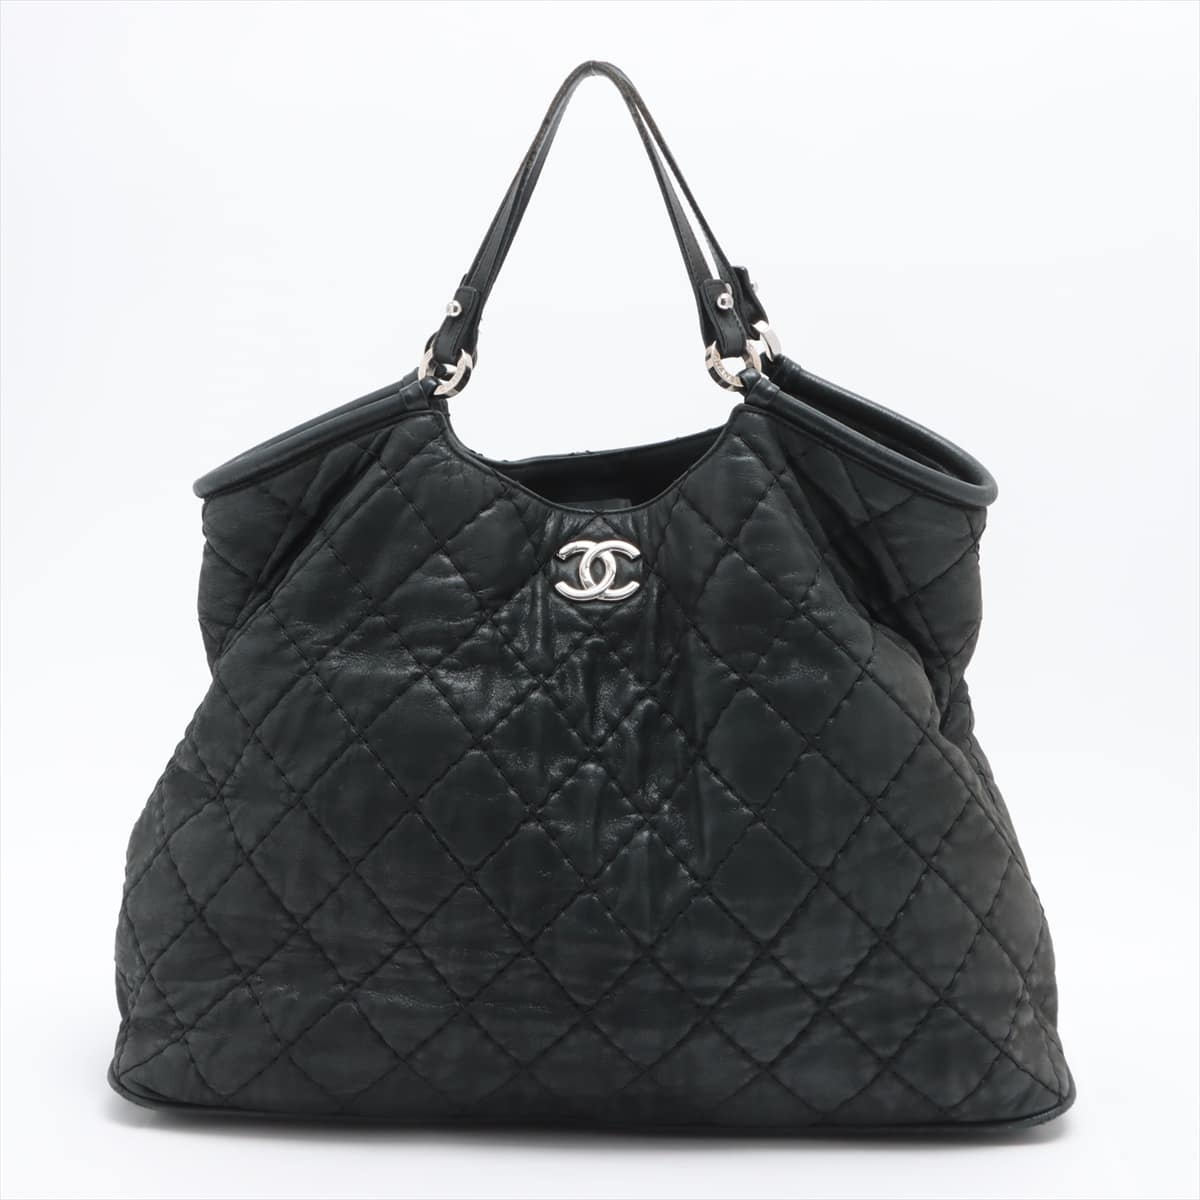 Chanel Matelasse Coating leather Chain tote bag 2WAY Grey Silver Metal fittings 16XXXXXX